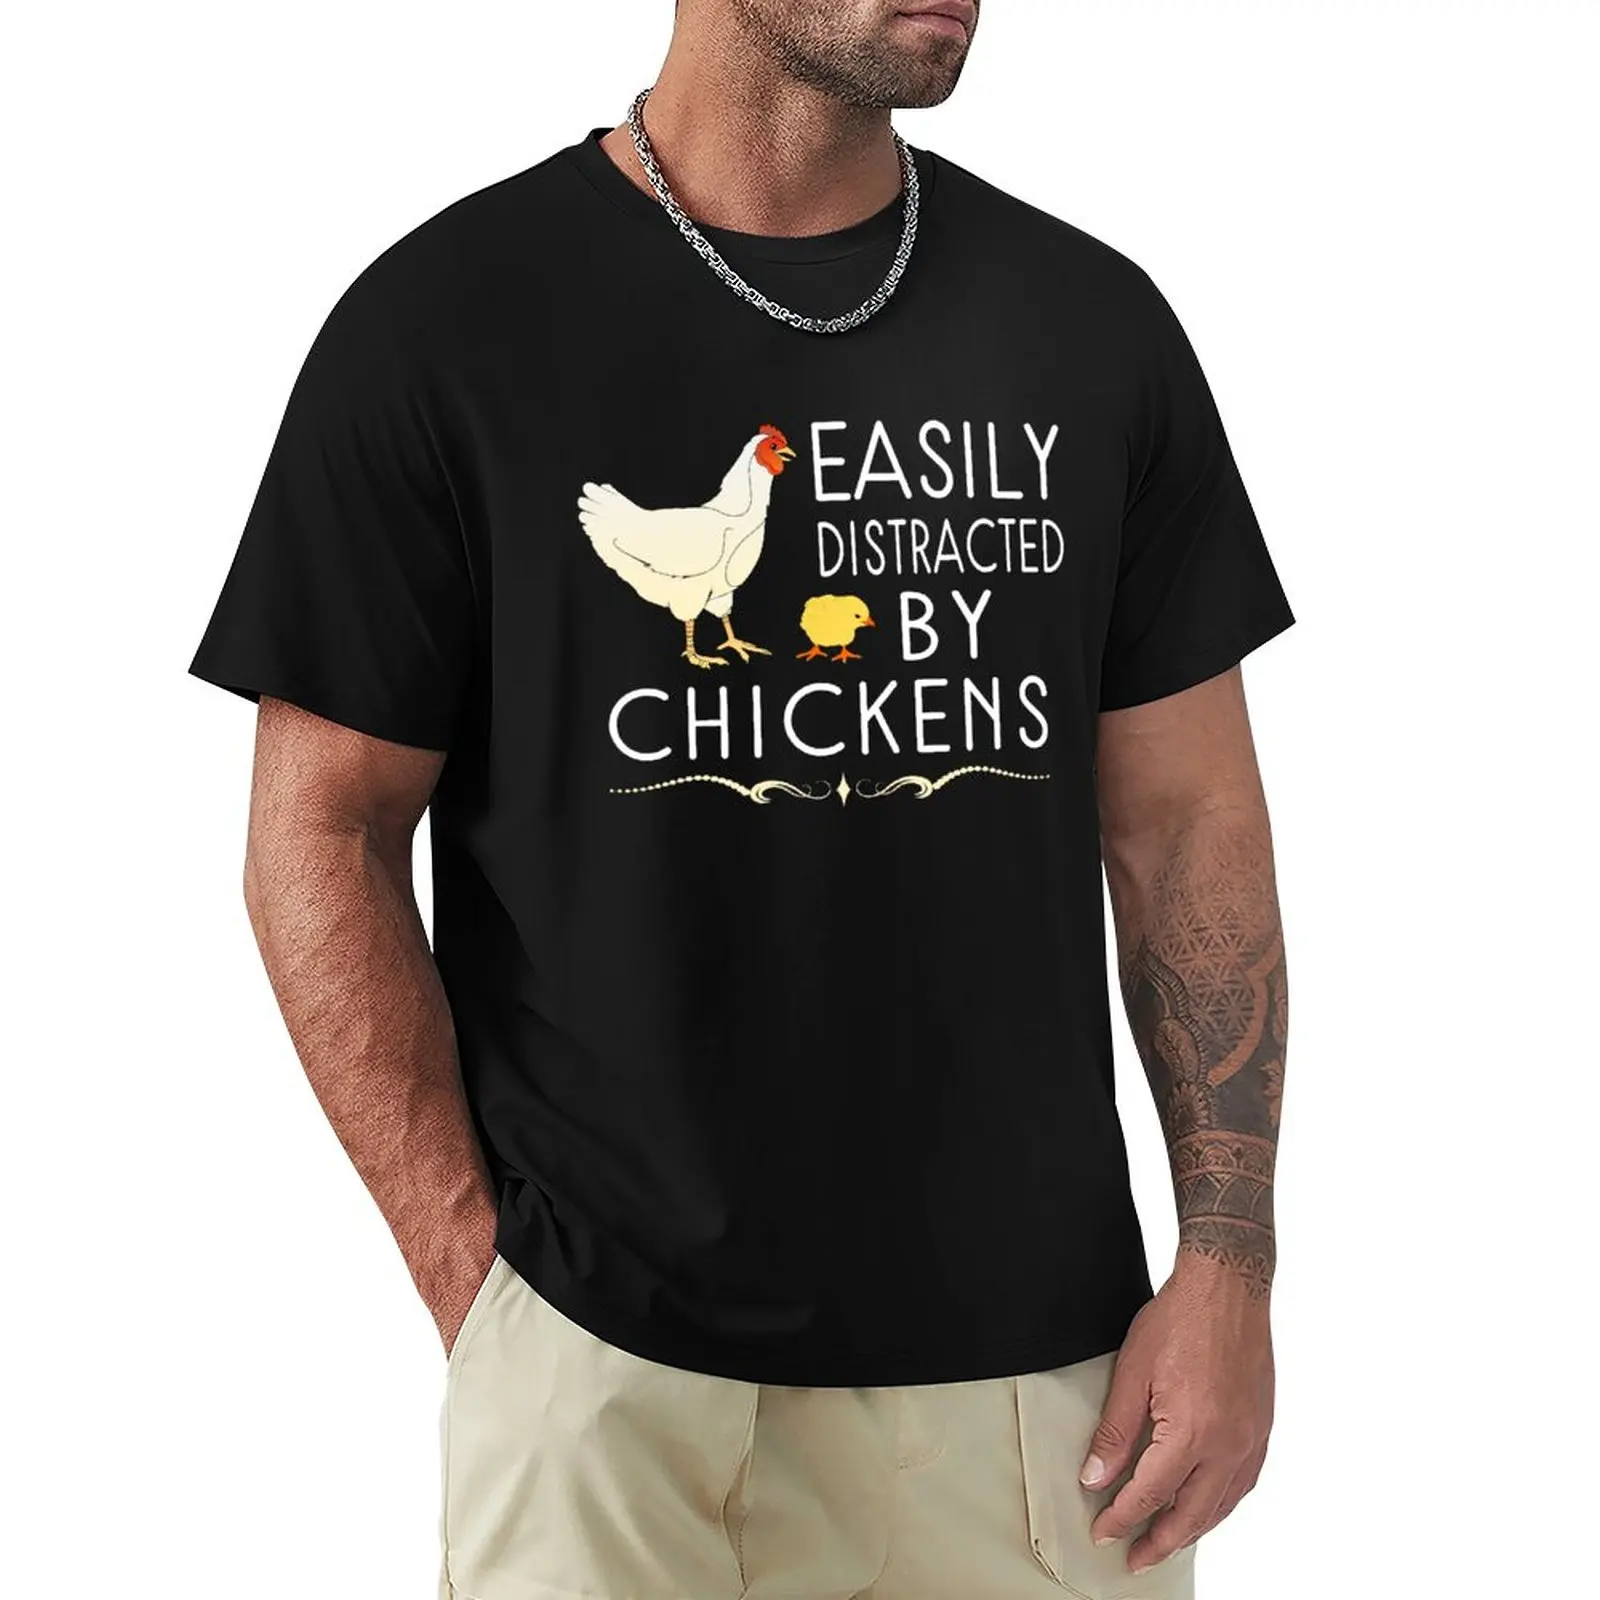 

Easily Distracted By Chickens T-Shirt Anime Plain t-shirt Kawaii Clothes Sports Fan t-shirts Mens T Shirts Casual Stylish